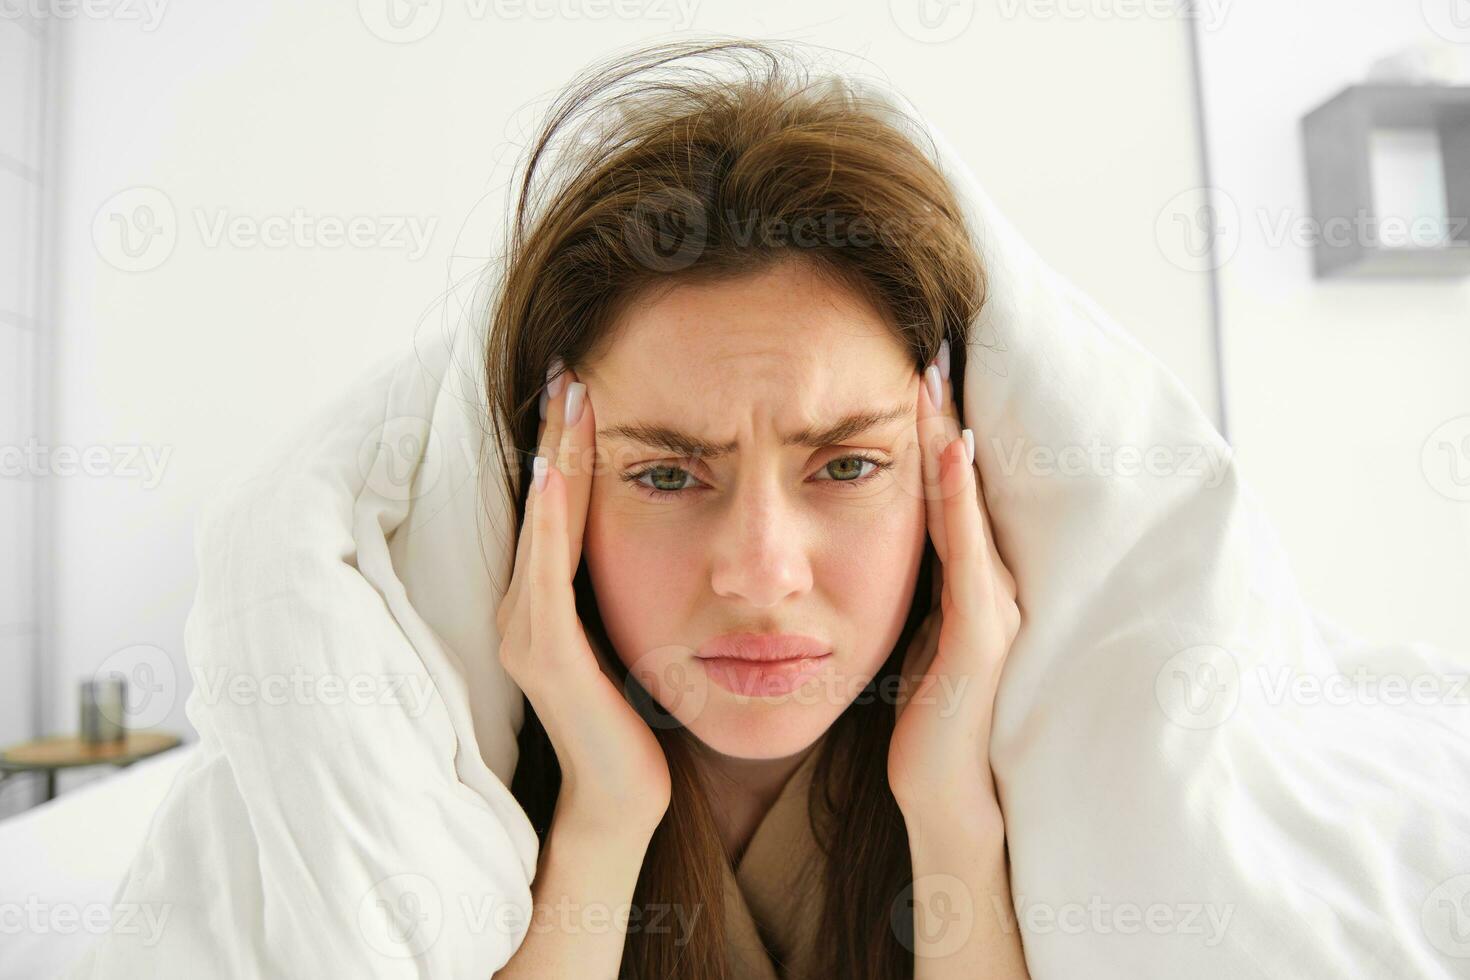 Woman feeling unwell in bed, lying in her bedroom under blanket and white sheets in morning, frowning and touching head, has headache or migraine photo